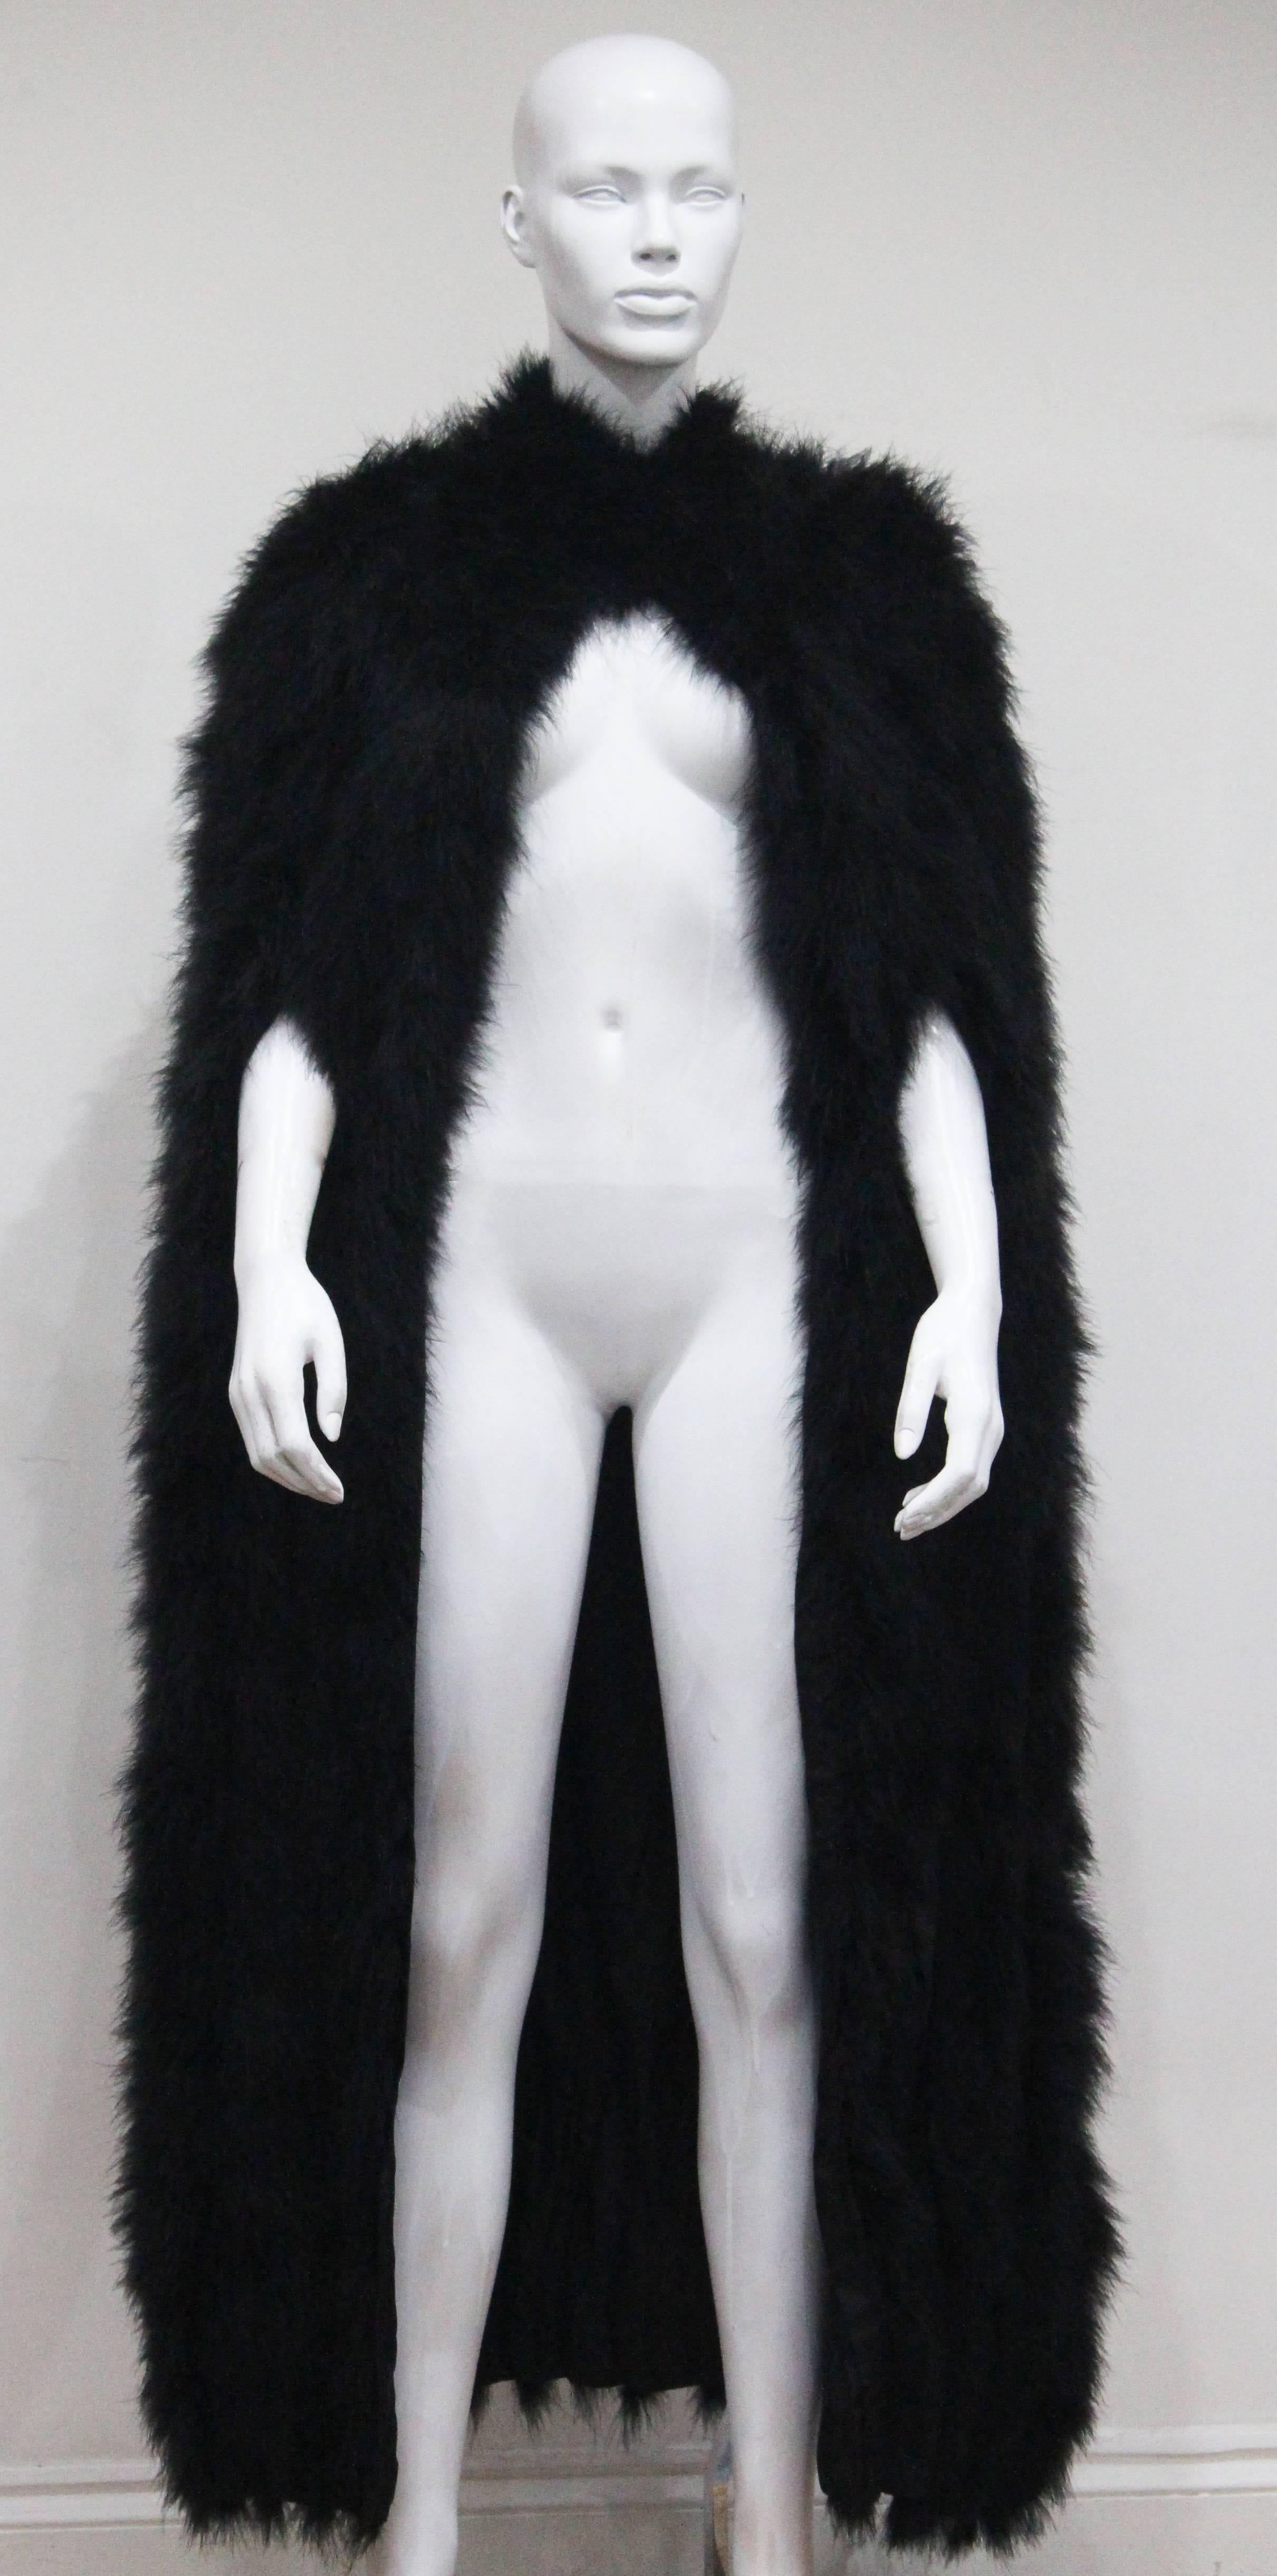 Black marabou full length cape made by Franka, which was a 1960s couturier in central London. The cape has two snap button closures around the neck and two arm holes. 